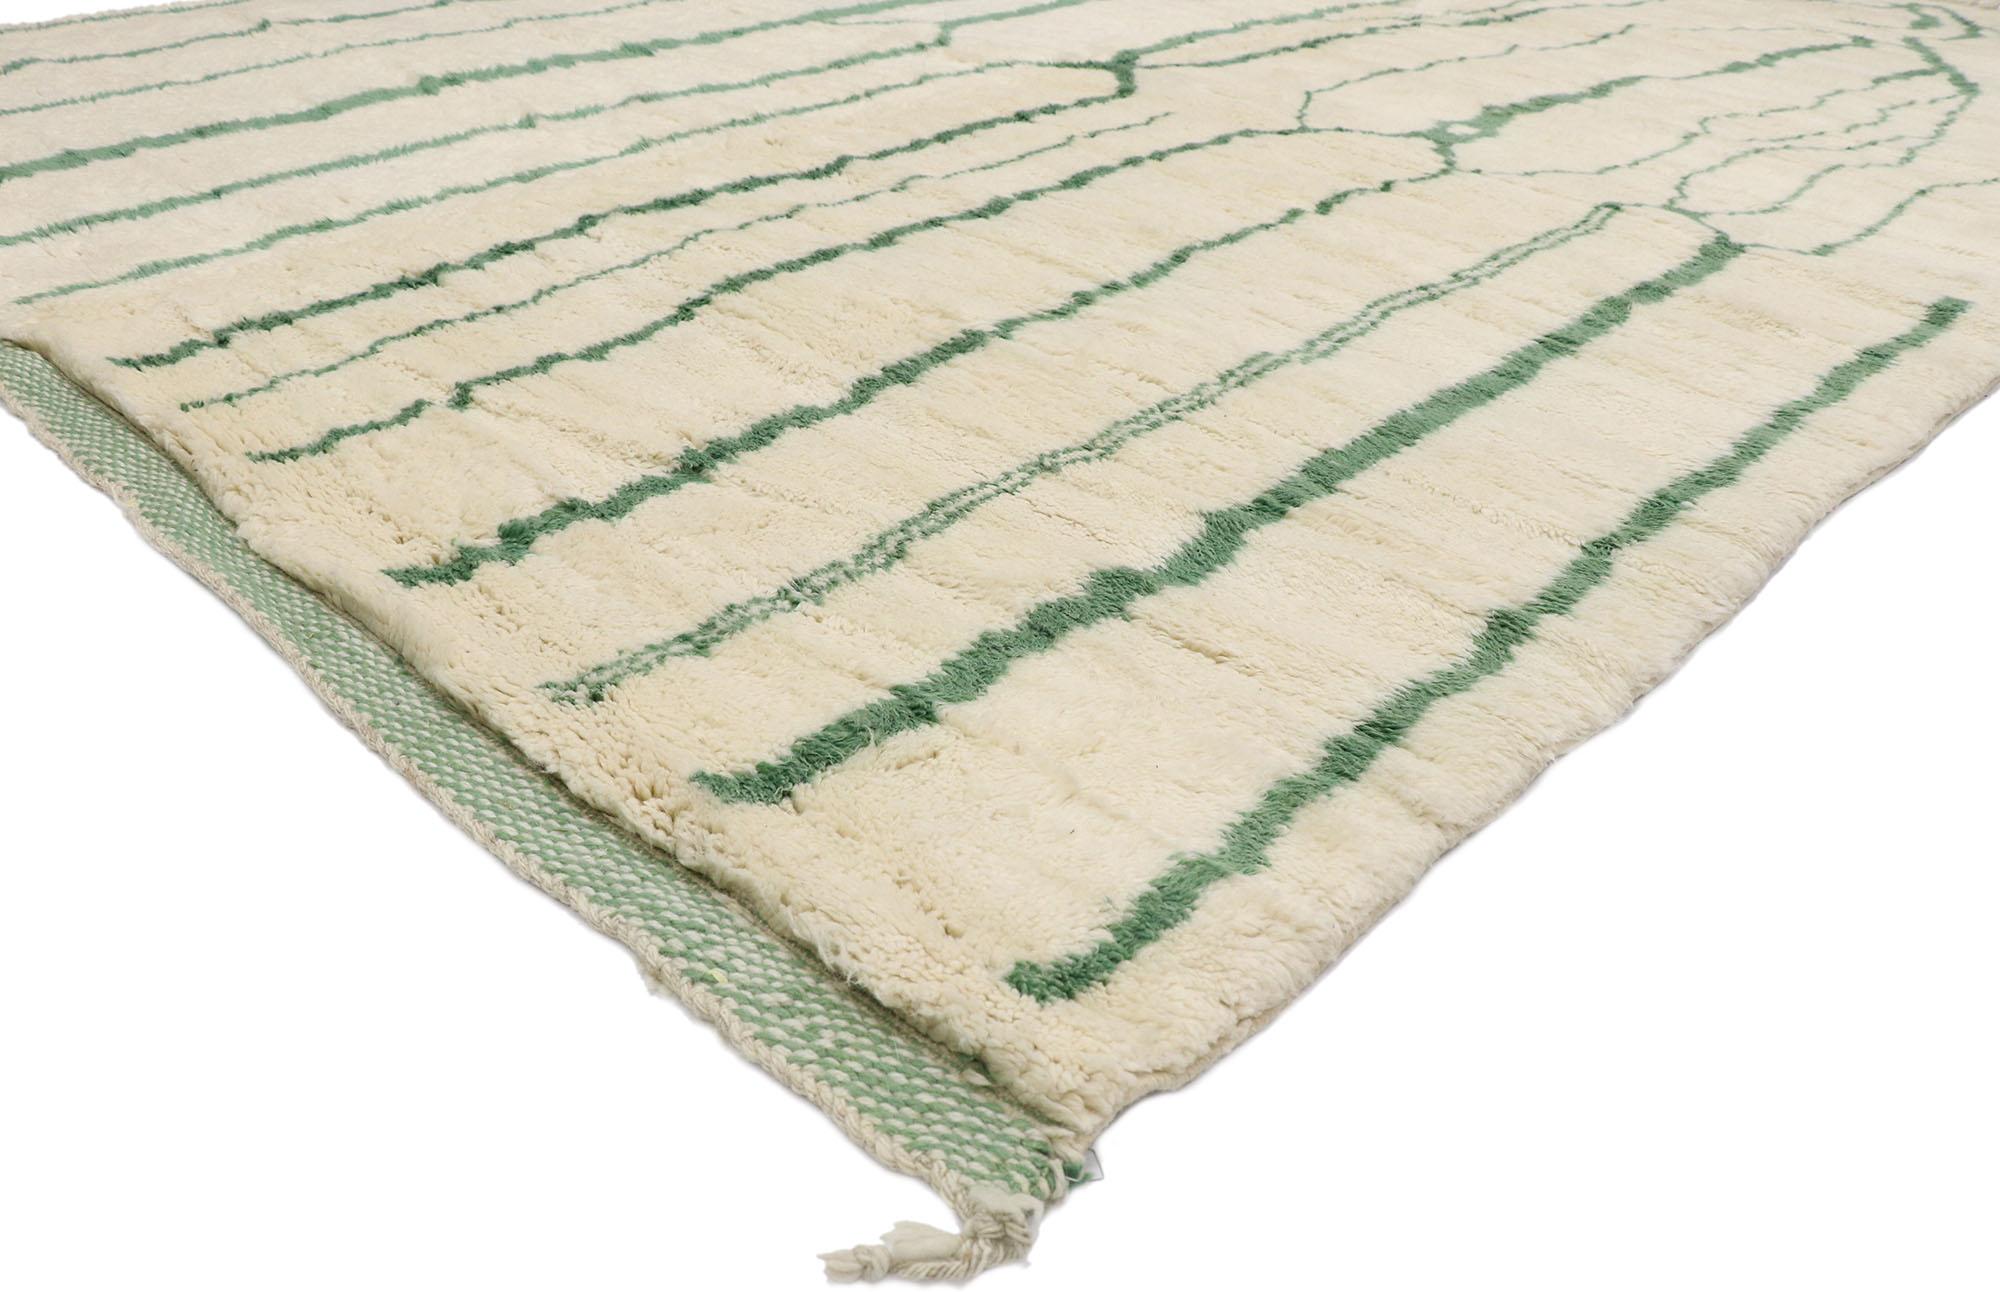 21122 New Contemporary Berber Moroccan rug with Biophilic Design 08'11 x 12'02. Cozy contemporary meets Biophilic Design while providing relaxation and a vision of aesthetic perfection. The abrashed beige field features green lines running from the